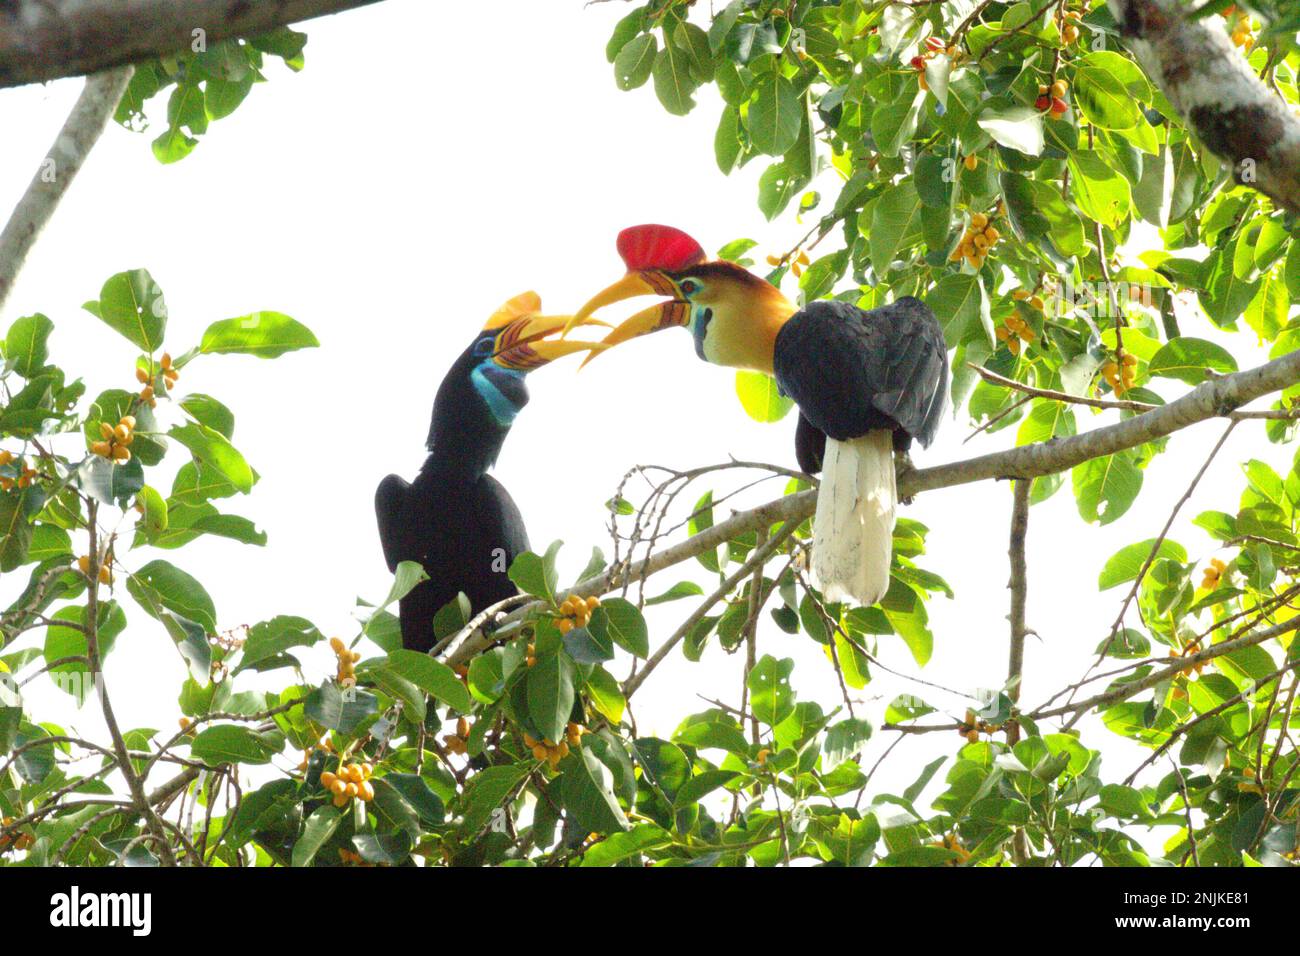 A pair of knobbed hornbills, or sometimes called Sulawesi wrinkled hornbill (Rhyticeros cassidix), is sharing food as they are foraging on a ficus (fig) tree in Tangkoko Nature Reserve, North Sulawesi, Indonesia. Due to their dependency on forest and certain types of trees, hornbills in general are threatened by climate change. 'There is rapidly growing evidence for the negative effects of high temperatures on the behavior, physiology, breeding, and survival of various bird, mammal, and reptile species around the world,' said Dr. Nicholas Pattinson, a scientist from University of Cape Town. Stock Photo